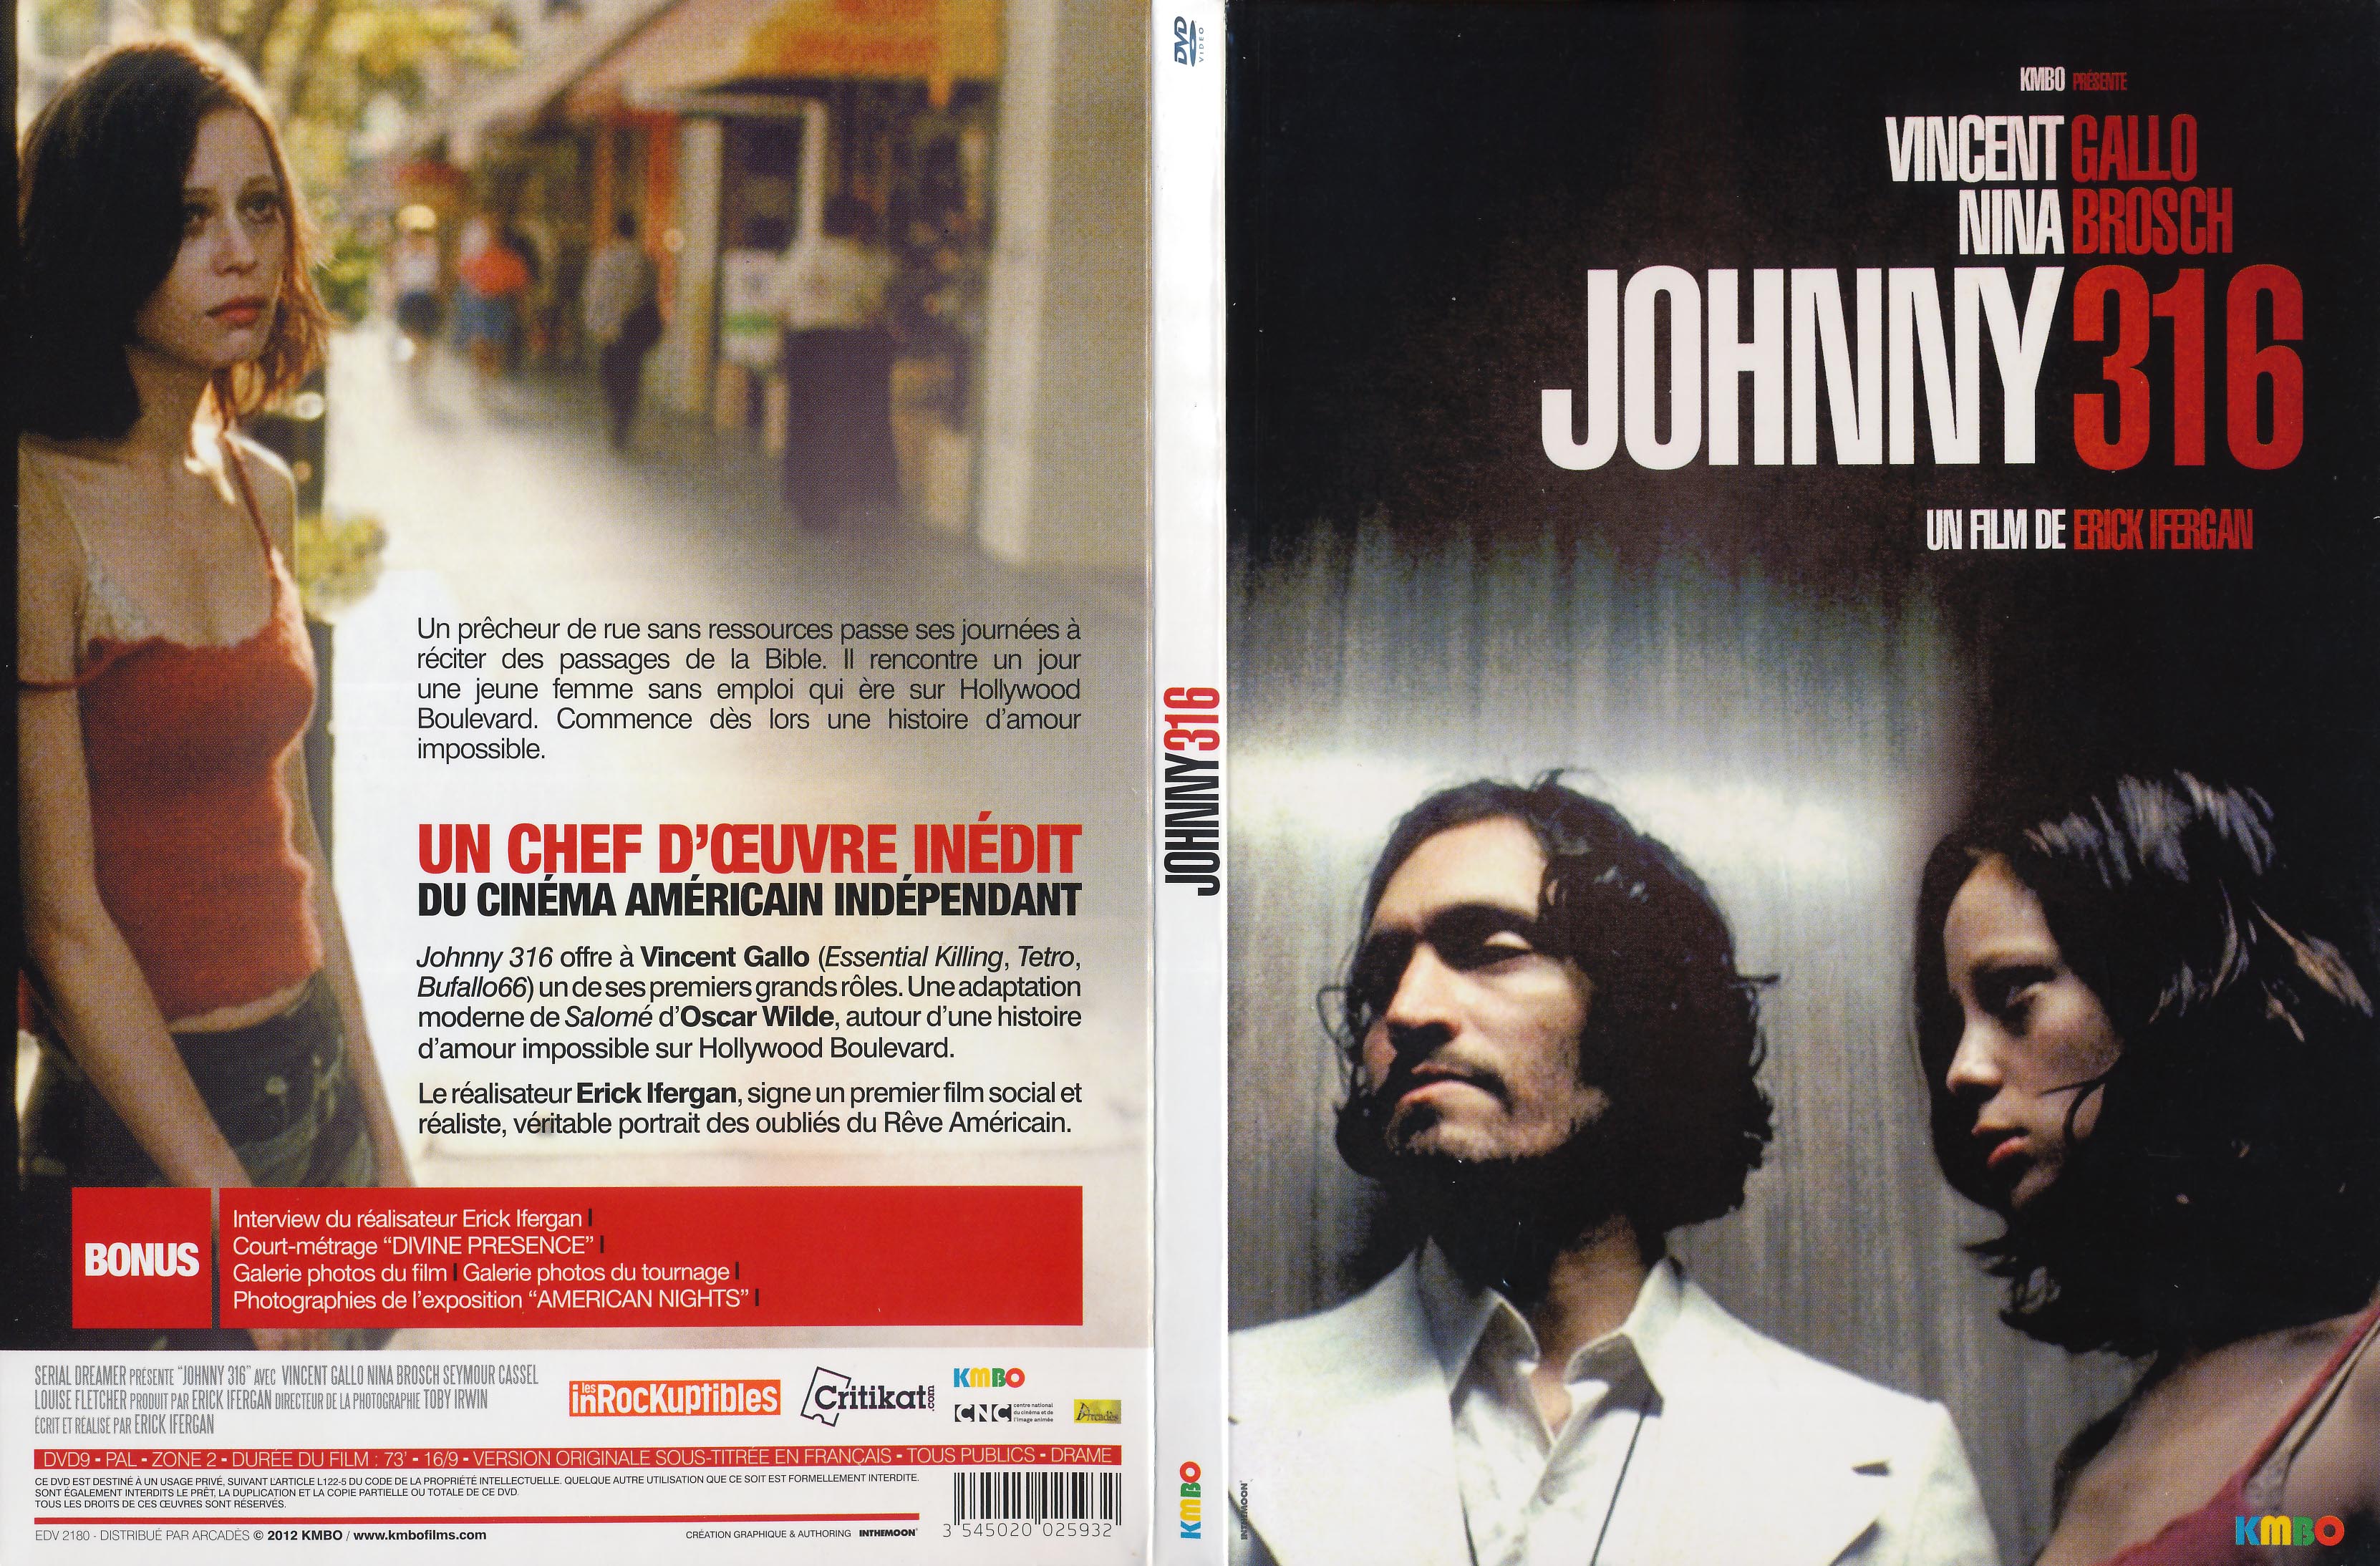 Jaquette DVD Johnny 316